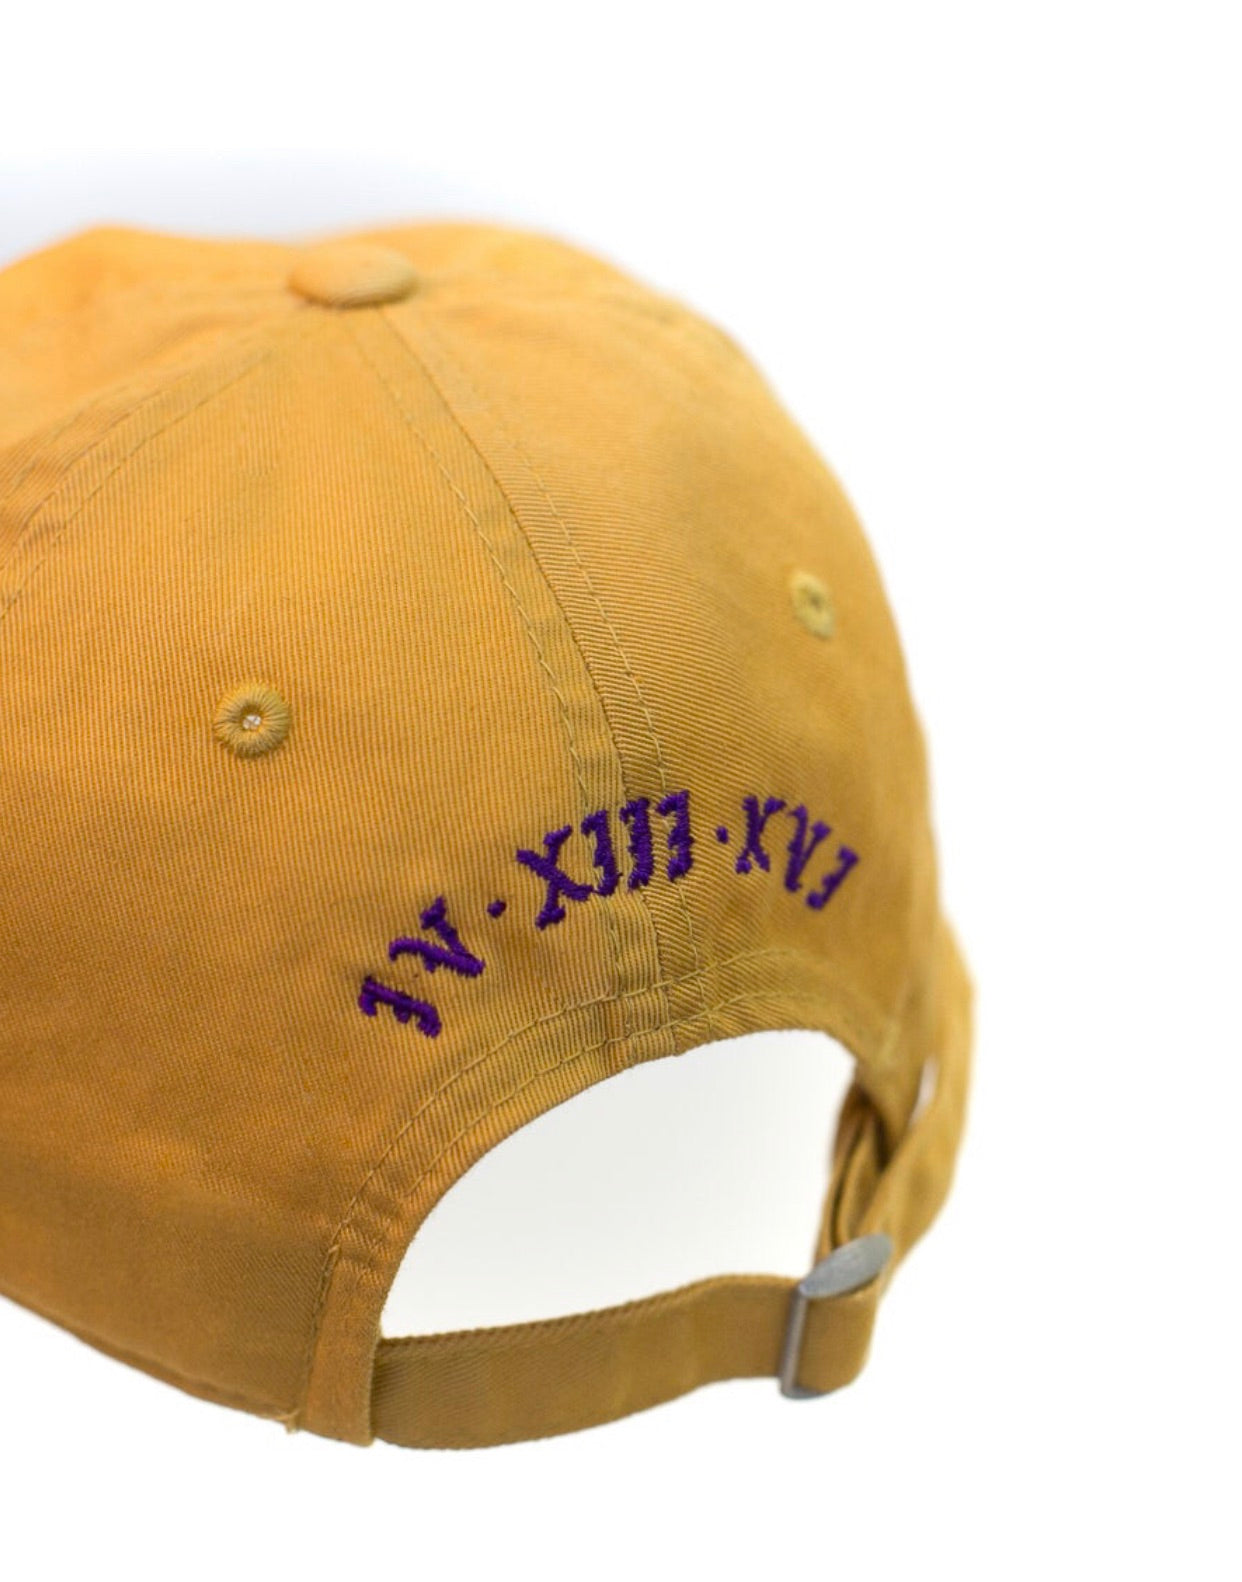 Lids is Offering FREE Embroidery on Your Hat in Honor of Kobe Bryant